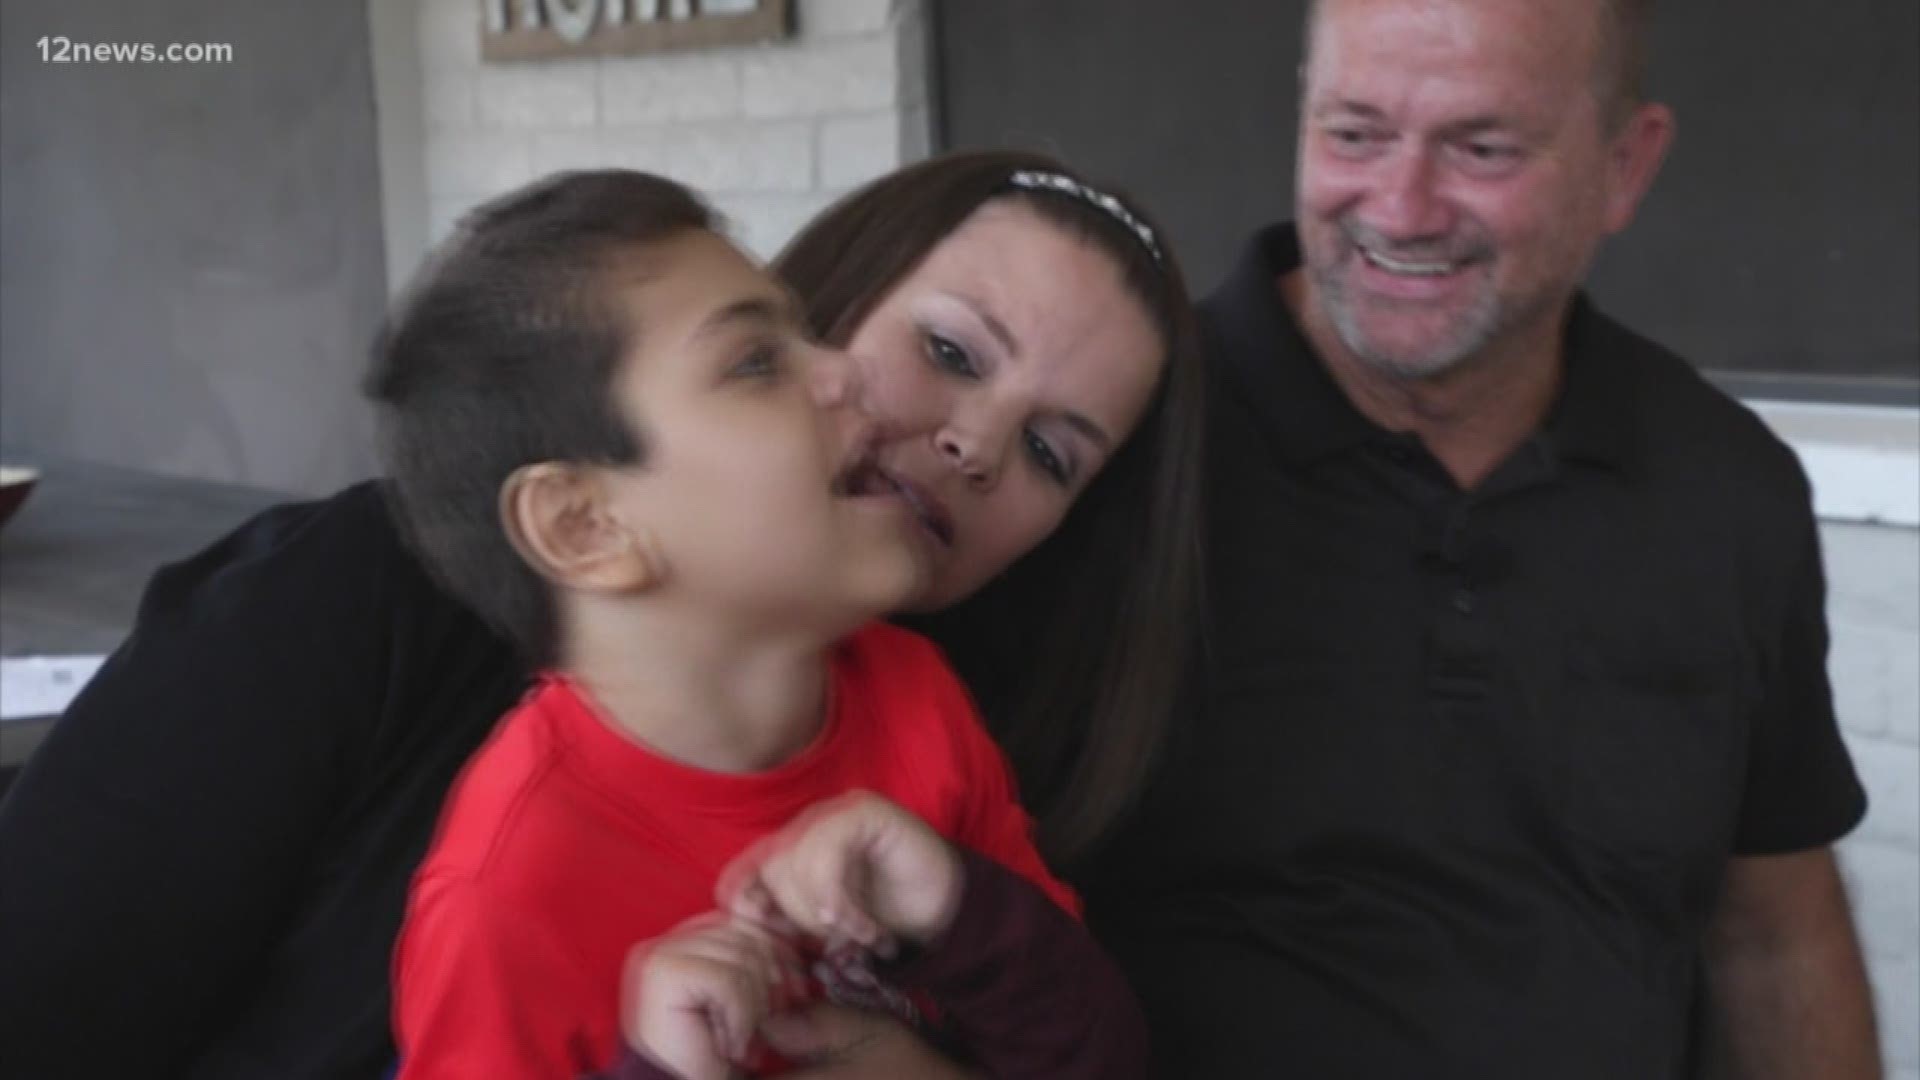 Two years after being profiled in Wednesday's Child, 6-year-old D'Angelo has found his forever family. Kirt and Jenna finalized their adoption of D'Angelo earlier this year, ready to embrace the challenges of caring for a child with medical needs.